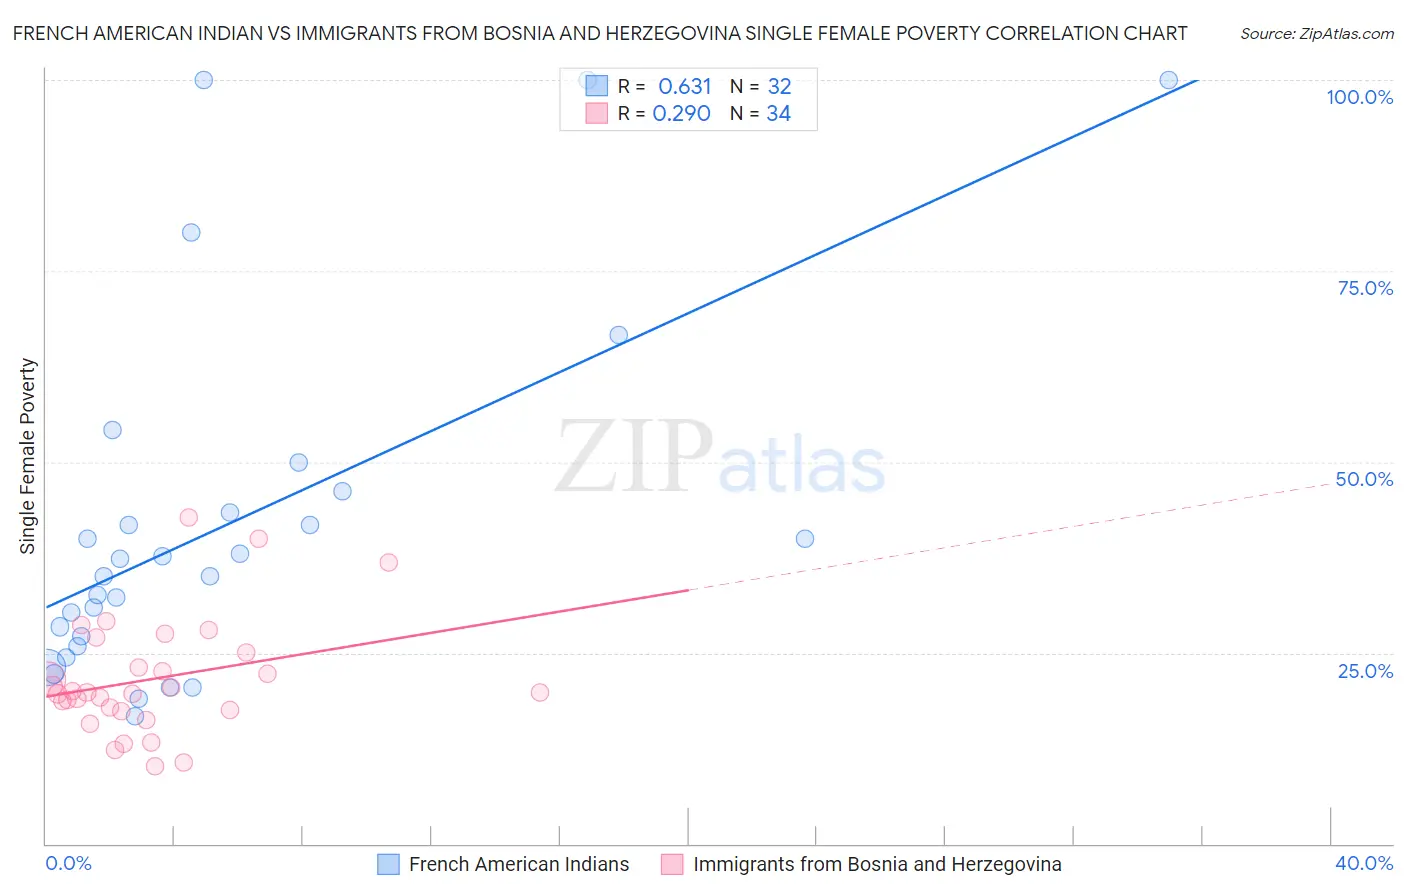 French American Indian vs Immigrants from Bosnia and Herzegovina Single Female Poverty